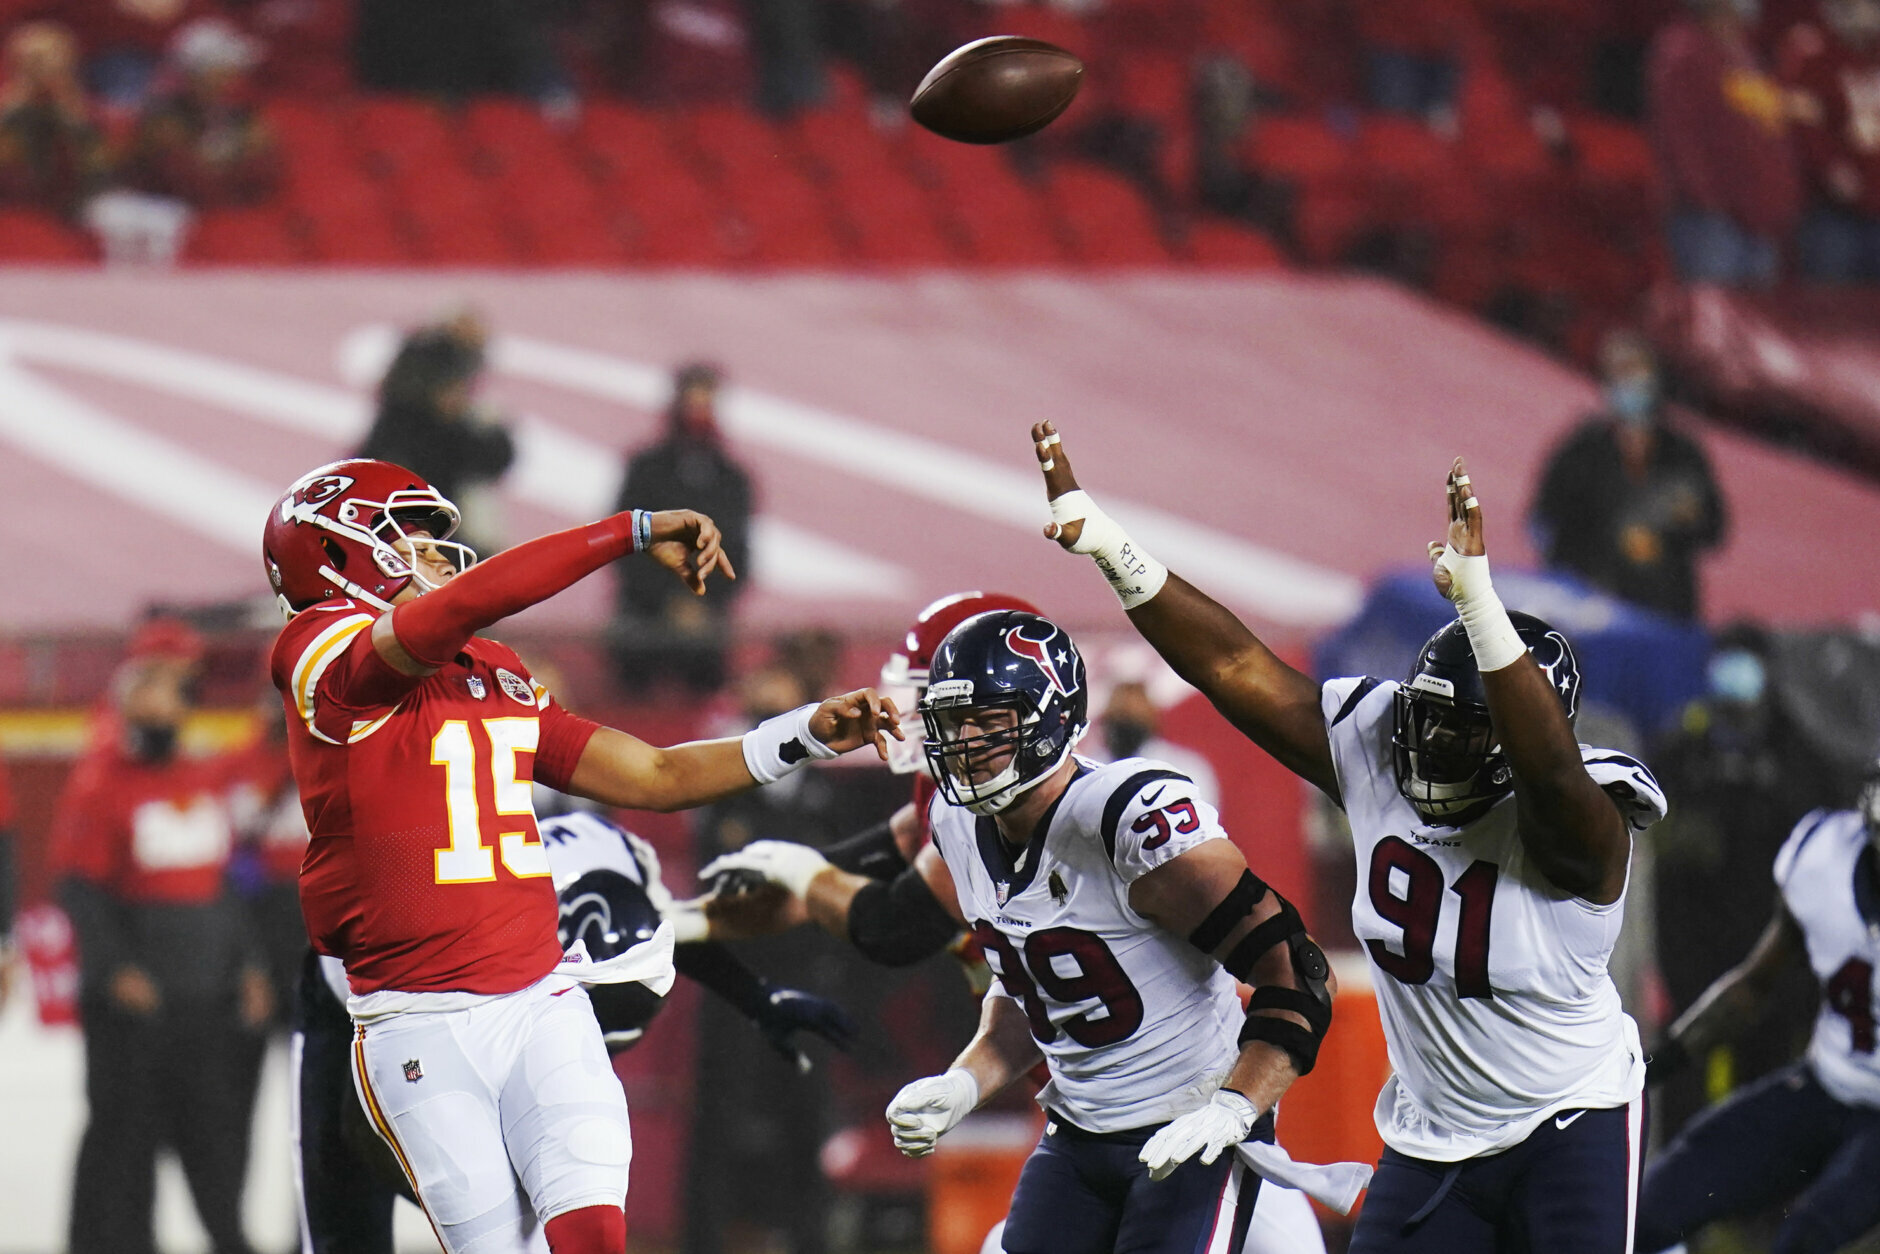 <p><b><i>Texans 20</i></b><br />
<b><i>Chiefs 34</i></b></p>
<p>Patrick Mahomes is 7-0 with 23 touchdowns, 0 interceptions in the month of September. He&#8217;s the first player to throw three touchdown passes with no interceptions in three consecutive season openers. Mahomes&#8217; greatness is as obvious as <a href="https://wtop.com/nfl/2020/09/2020-afc-south-preview/">Houston&#8217;s needless regression</a>.</p>
